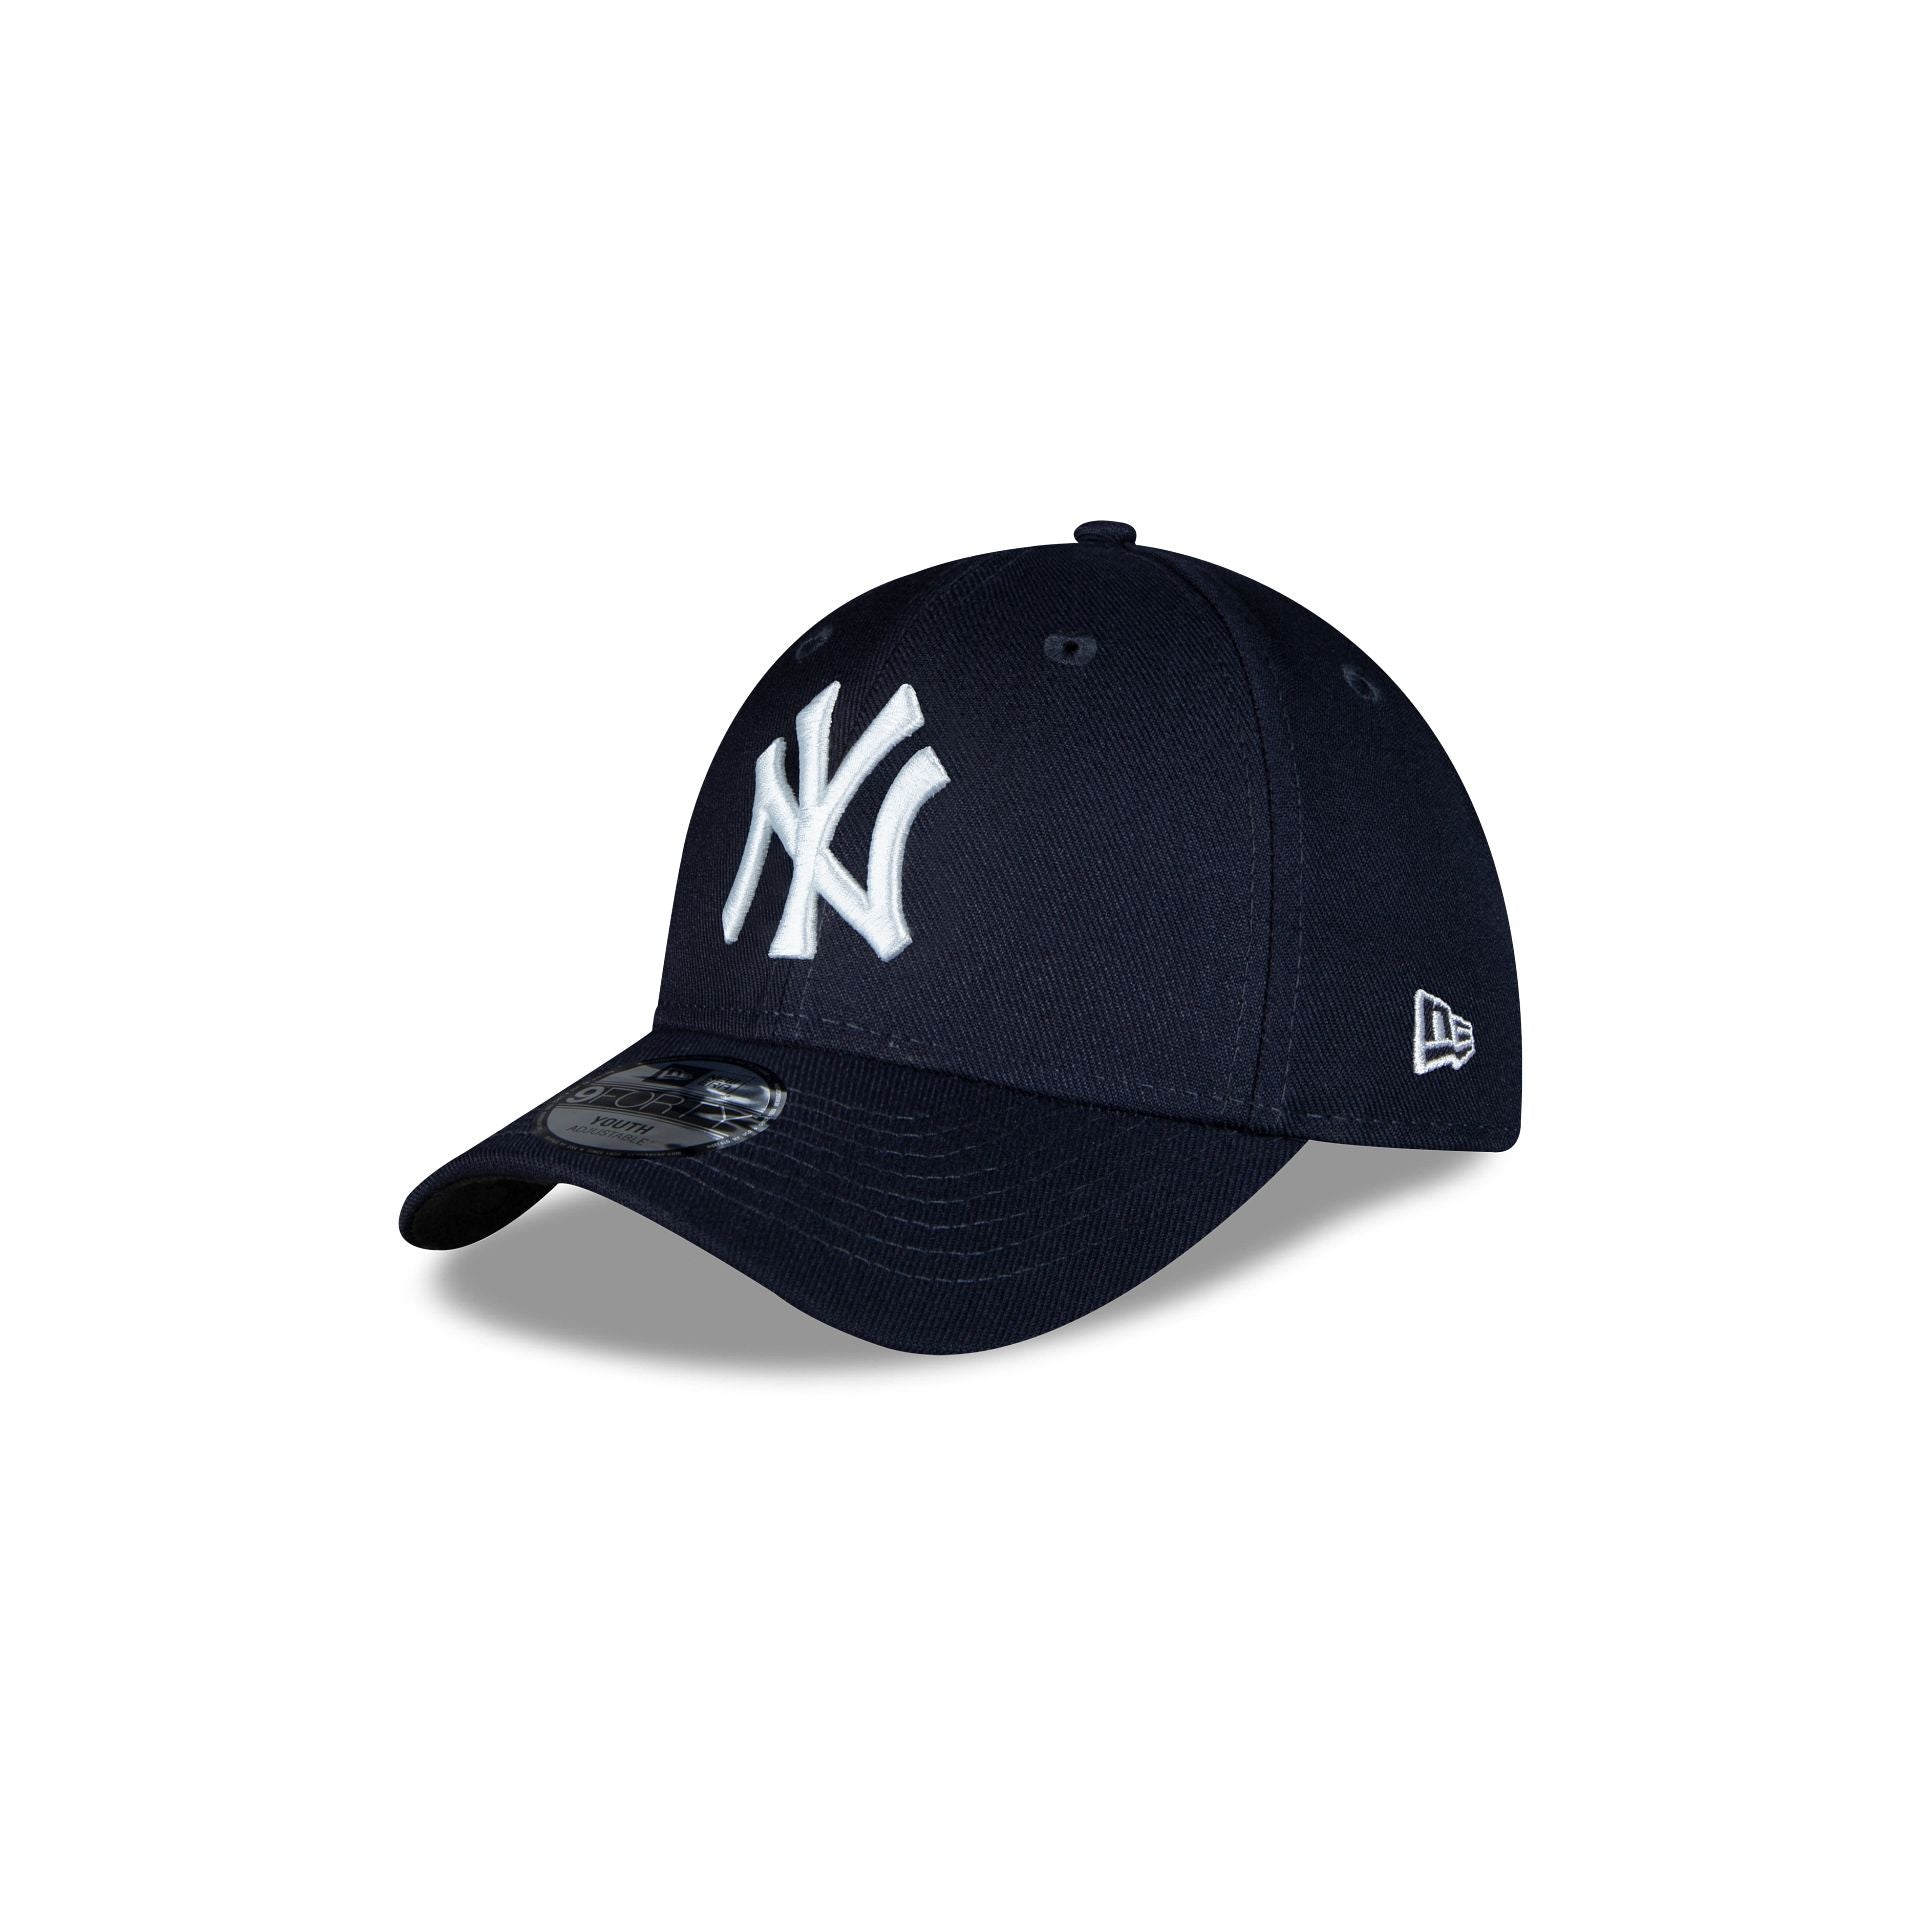 Cap New Yankees York Hat League Era – Kids New Adjustable The 9FORTY